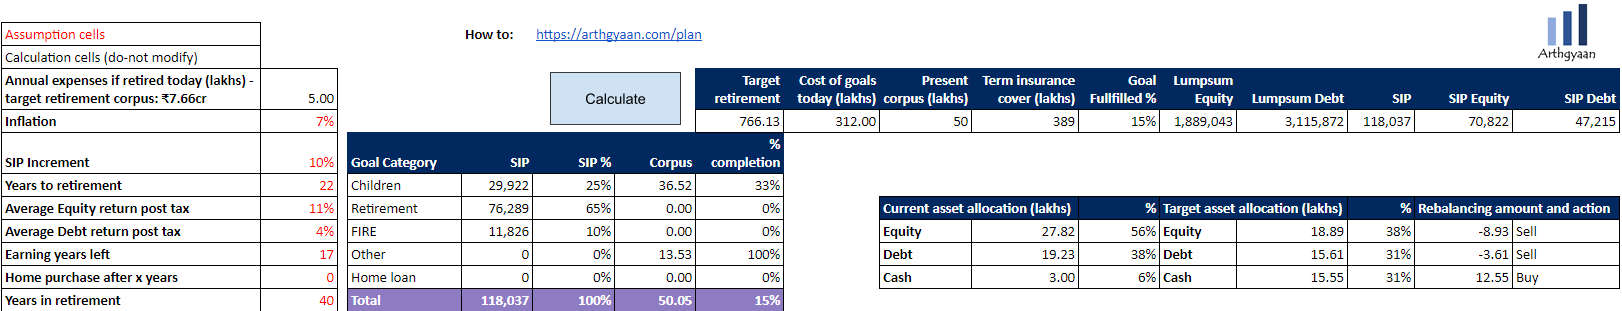 Arthgyaan goal-based investing tool for retirement